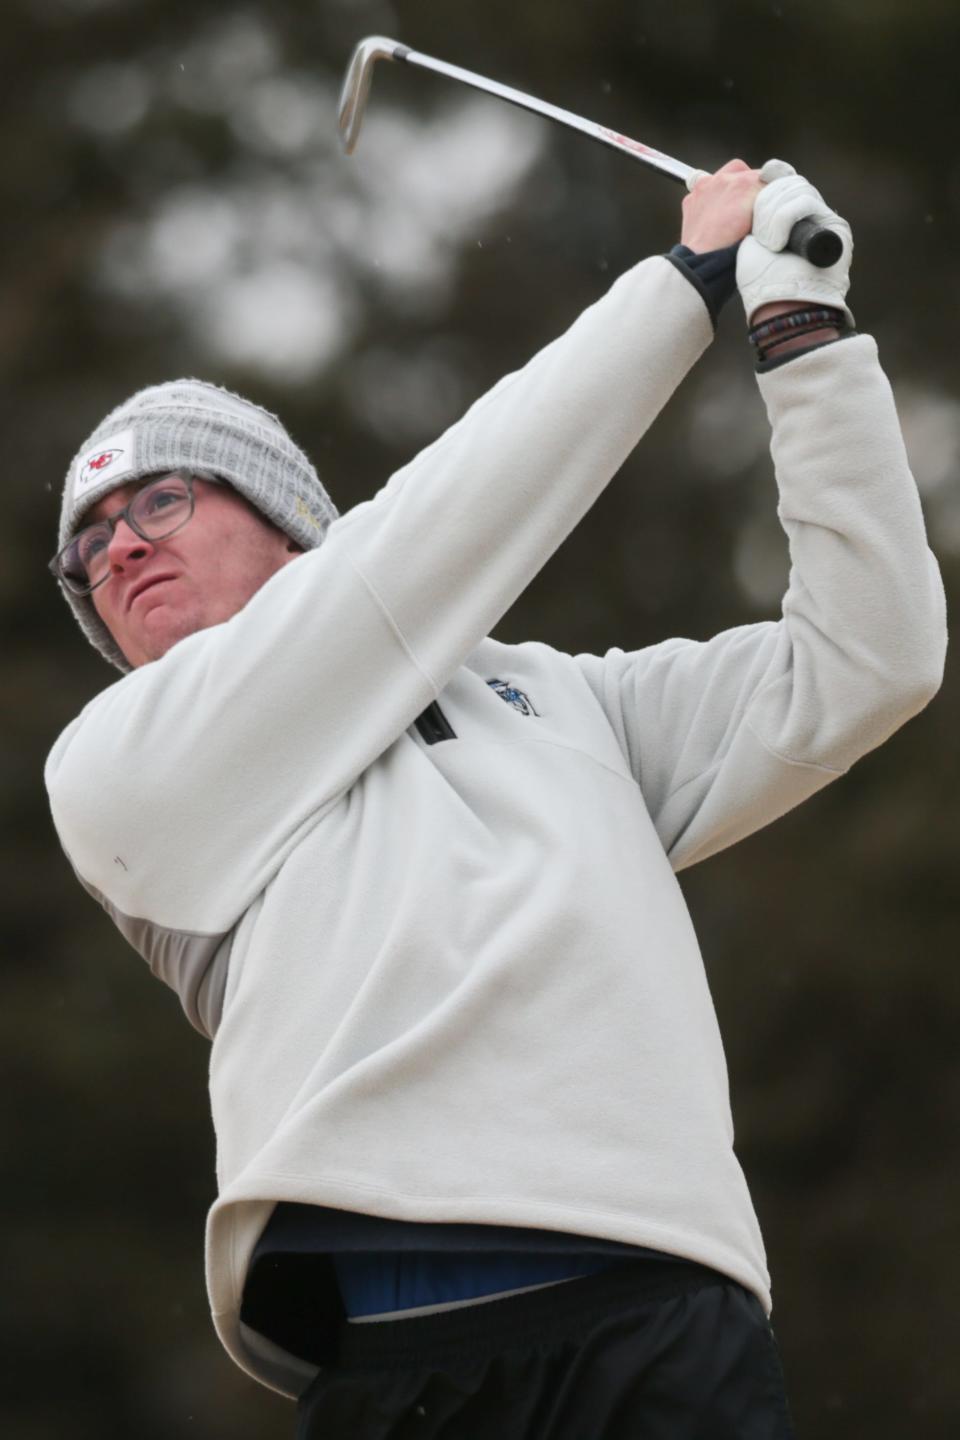 Washburn Rural's Turner Depperschmidt tees off of hole no. 12 at Wamego Country Club on April 7.